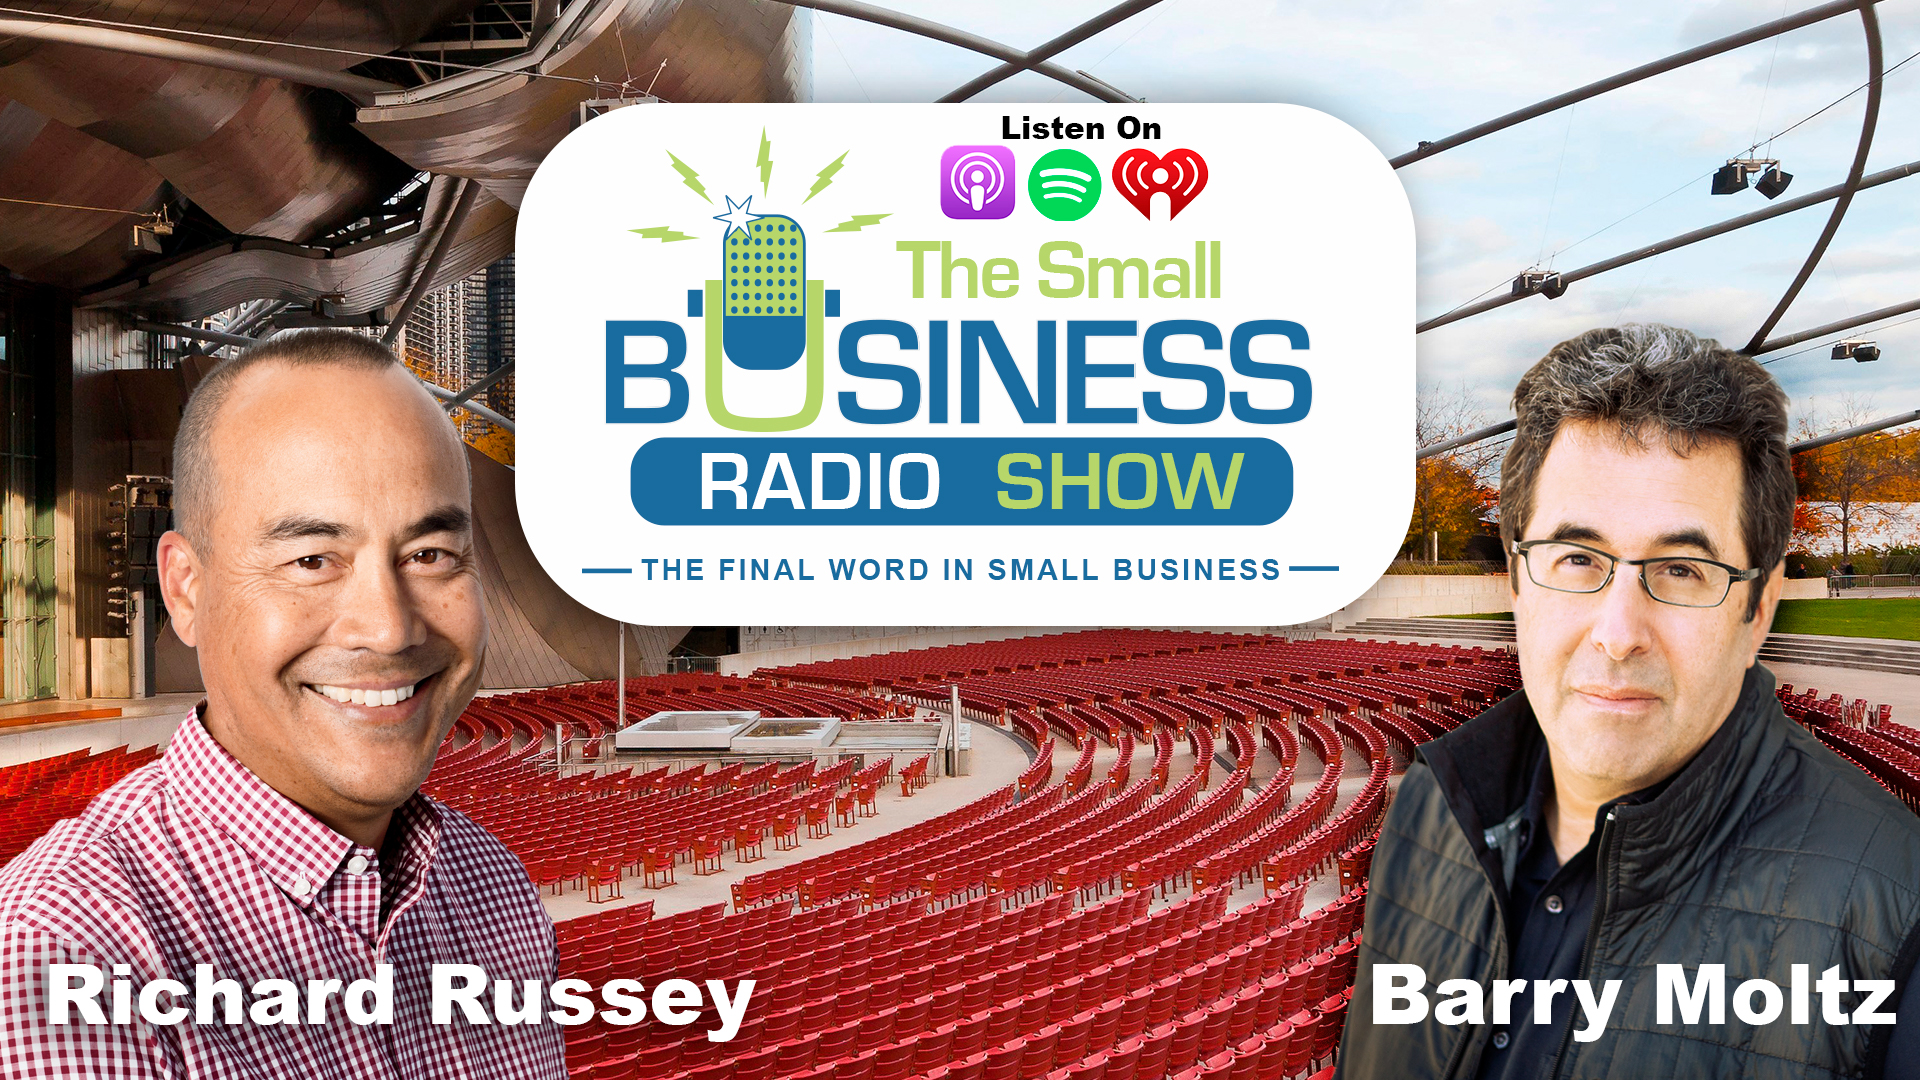 Richard Russey on The Small Business Radio Show